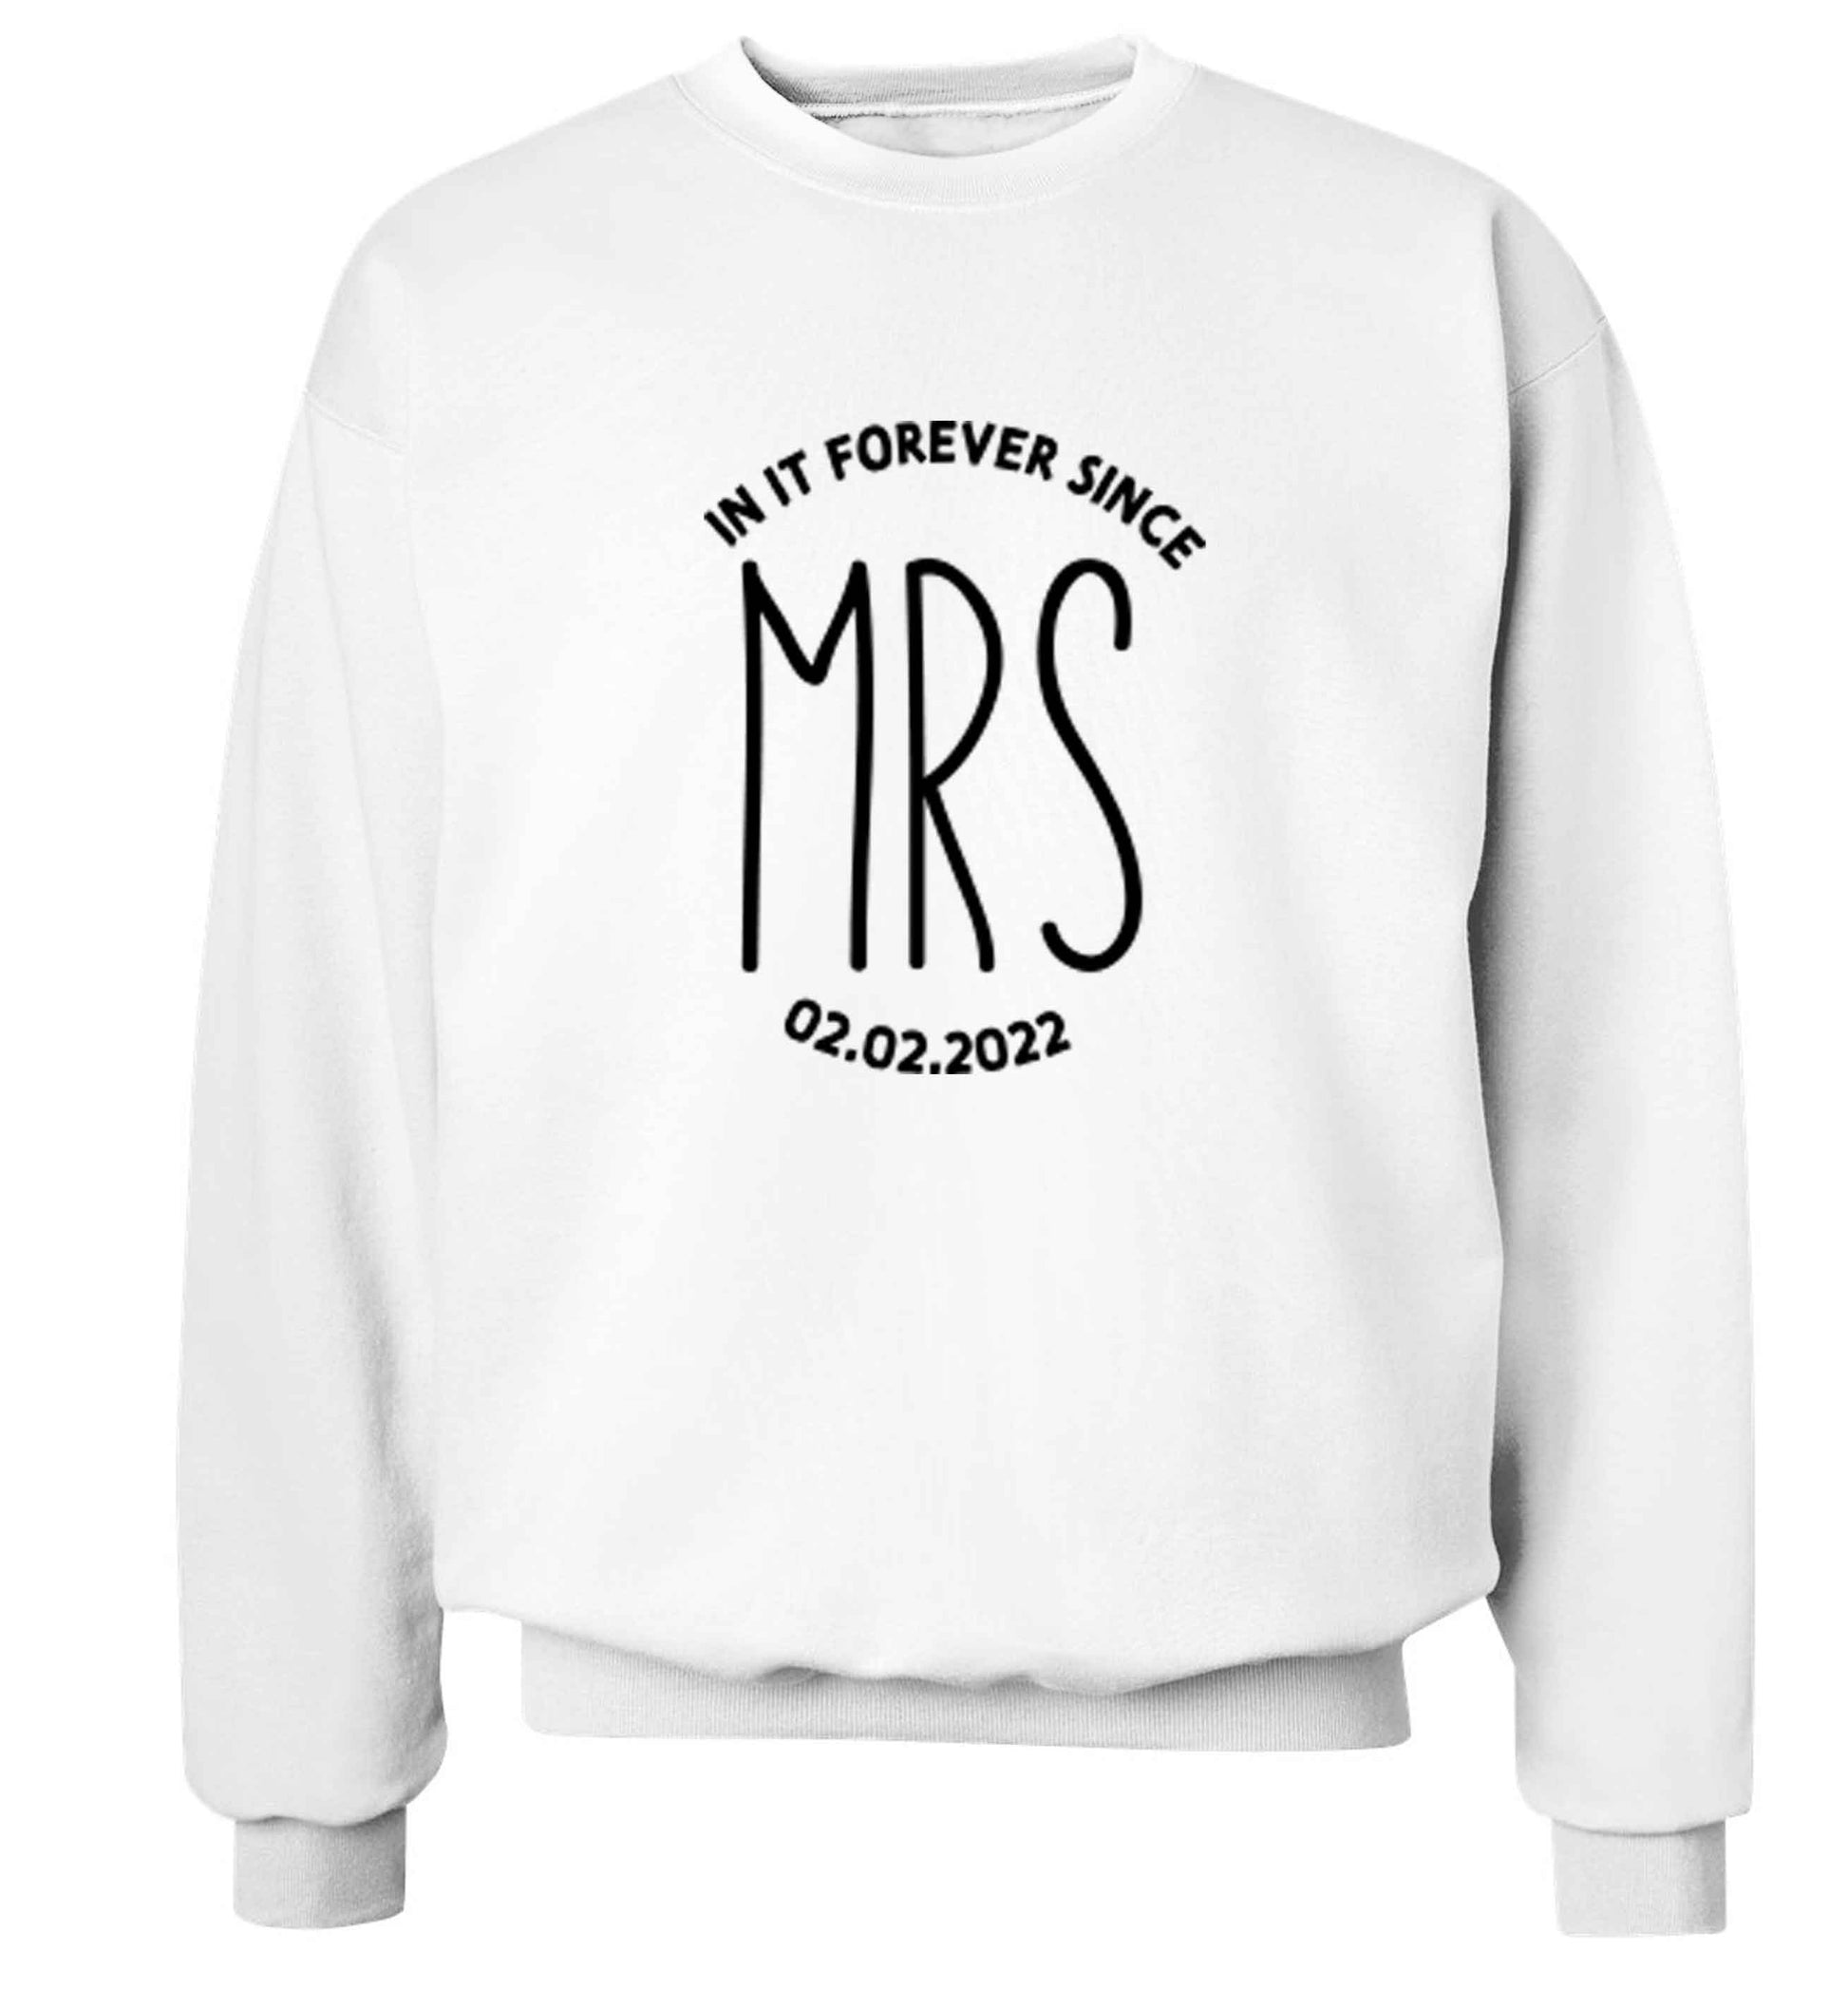 Funny matching gifts for him and her! Get matchy matchy, ideal for newlywed couples or a little valentines gift! adult's unisex white sweater 2XL